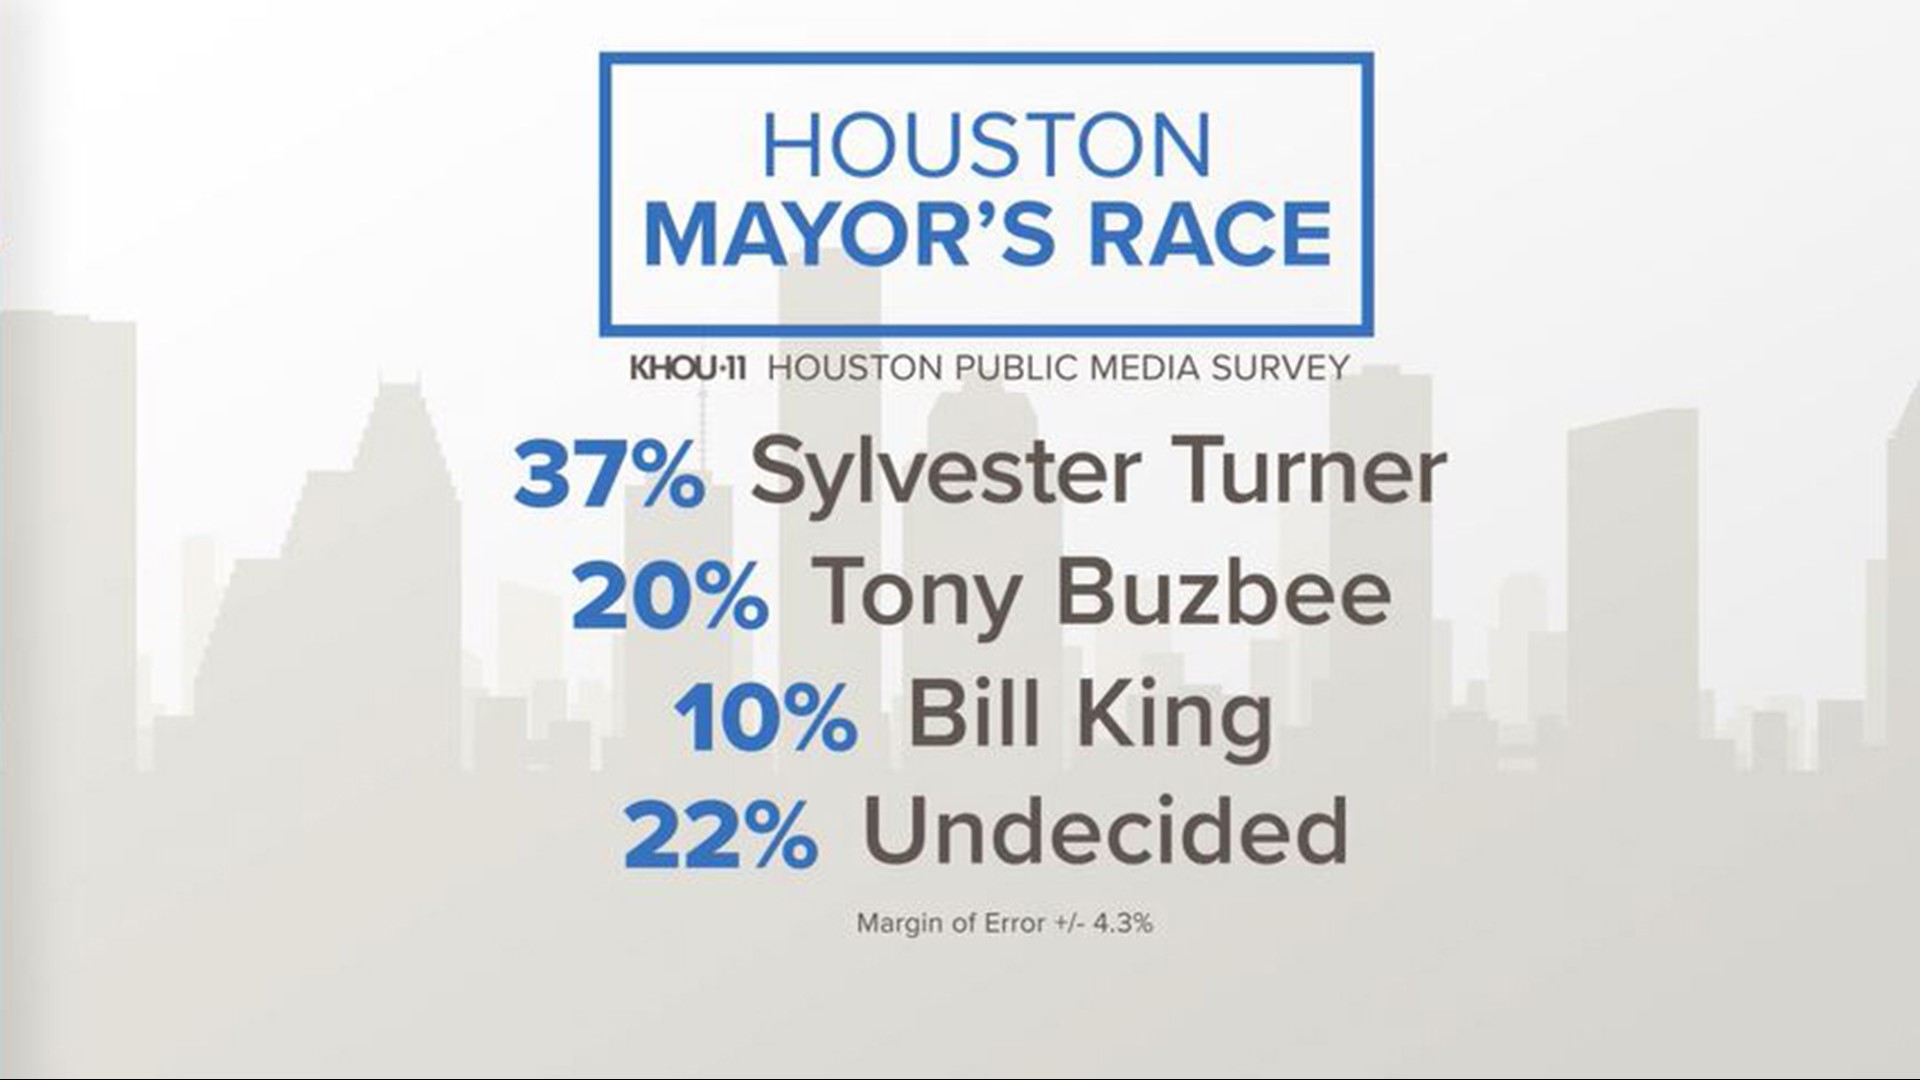 Turner leads Buzbee, King in race for Houston mayor, poll shows